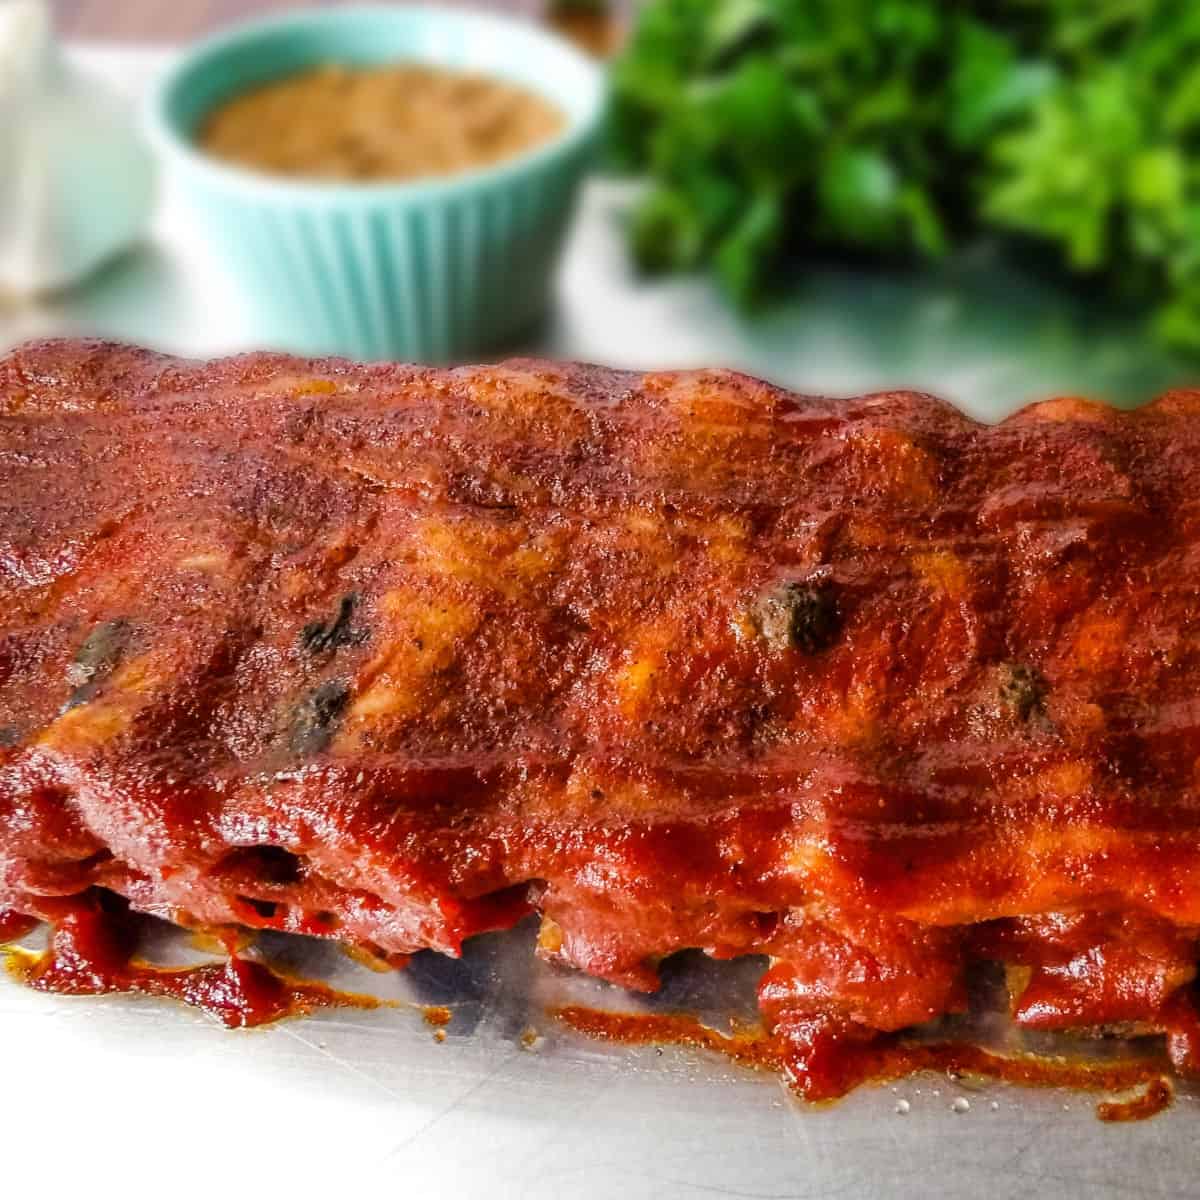 A rack of baby back pork ribs that have been cooked in the Instant Pot laying on a baking sheet.